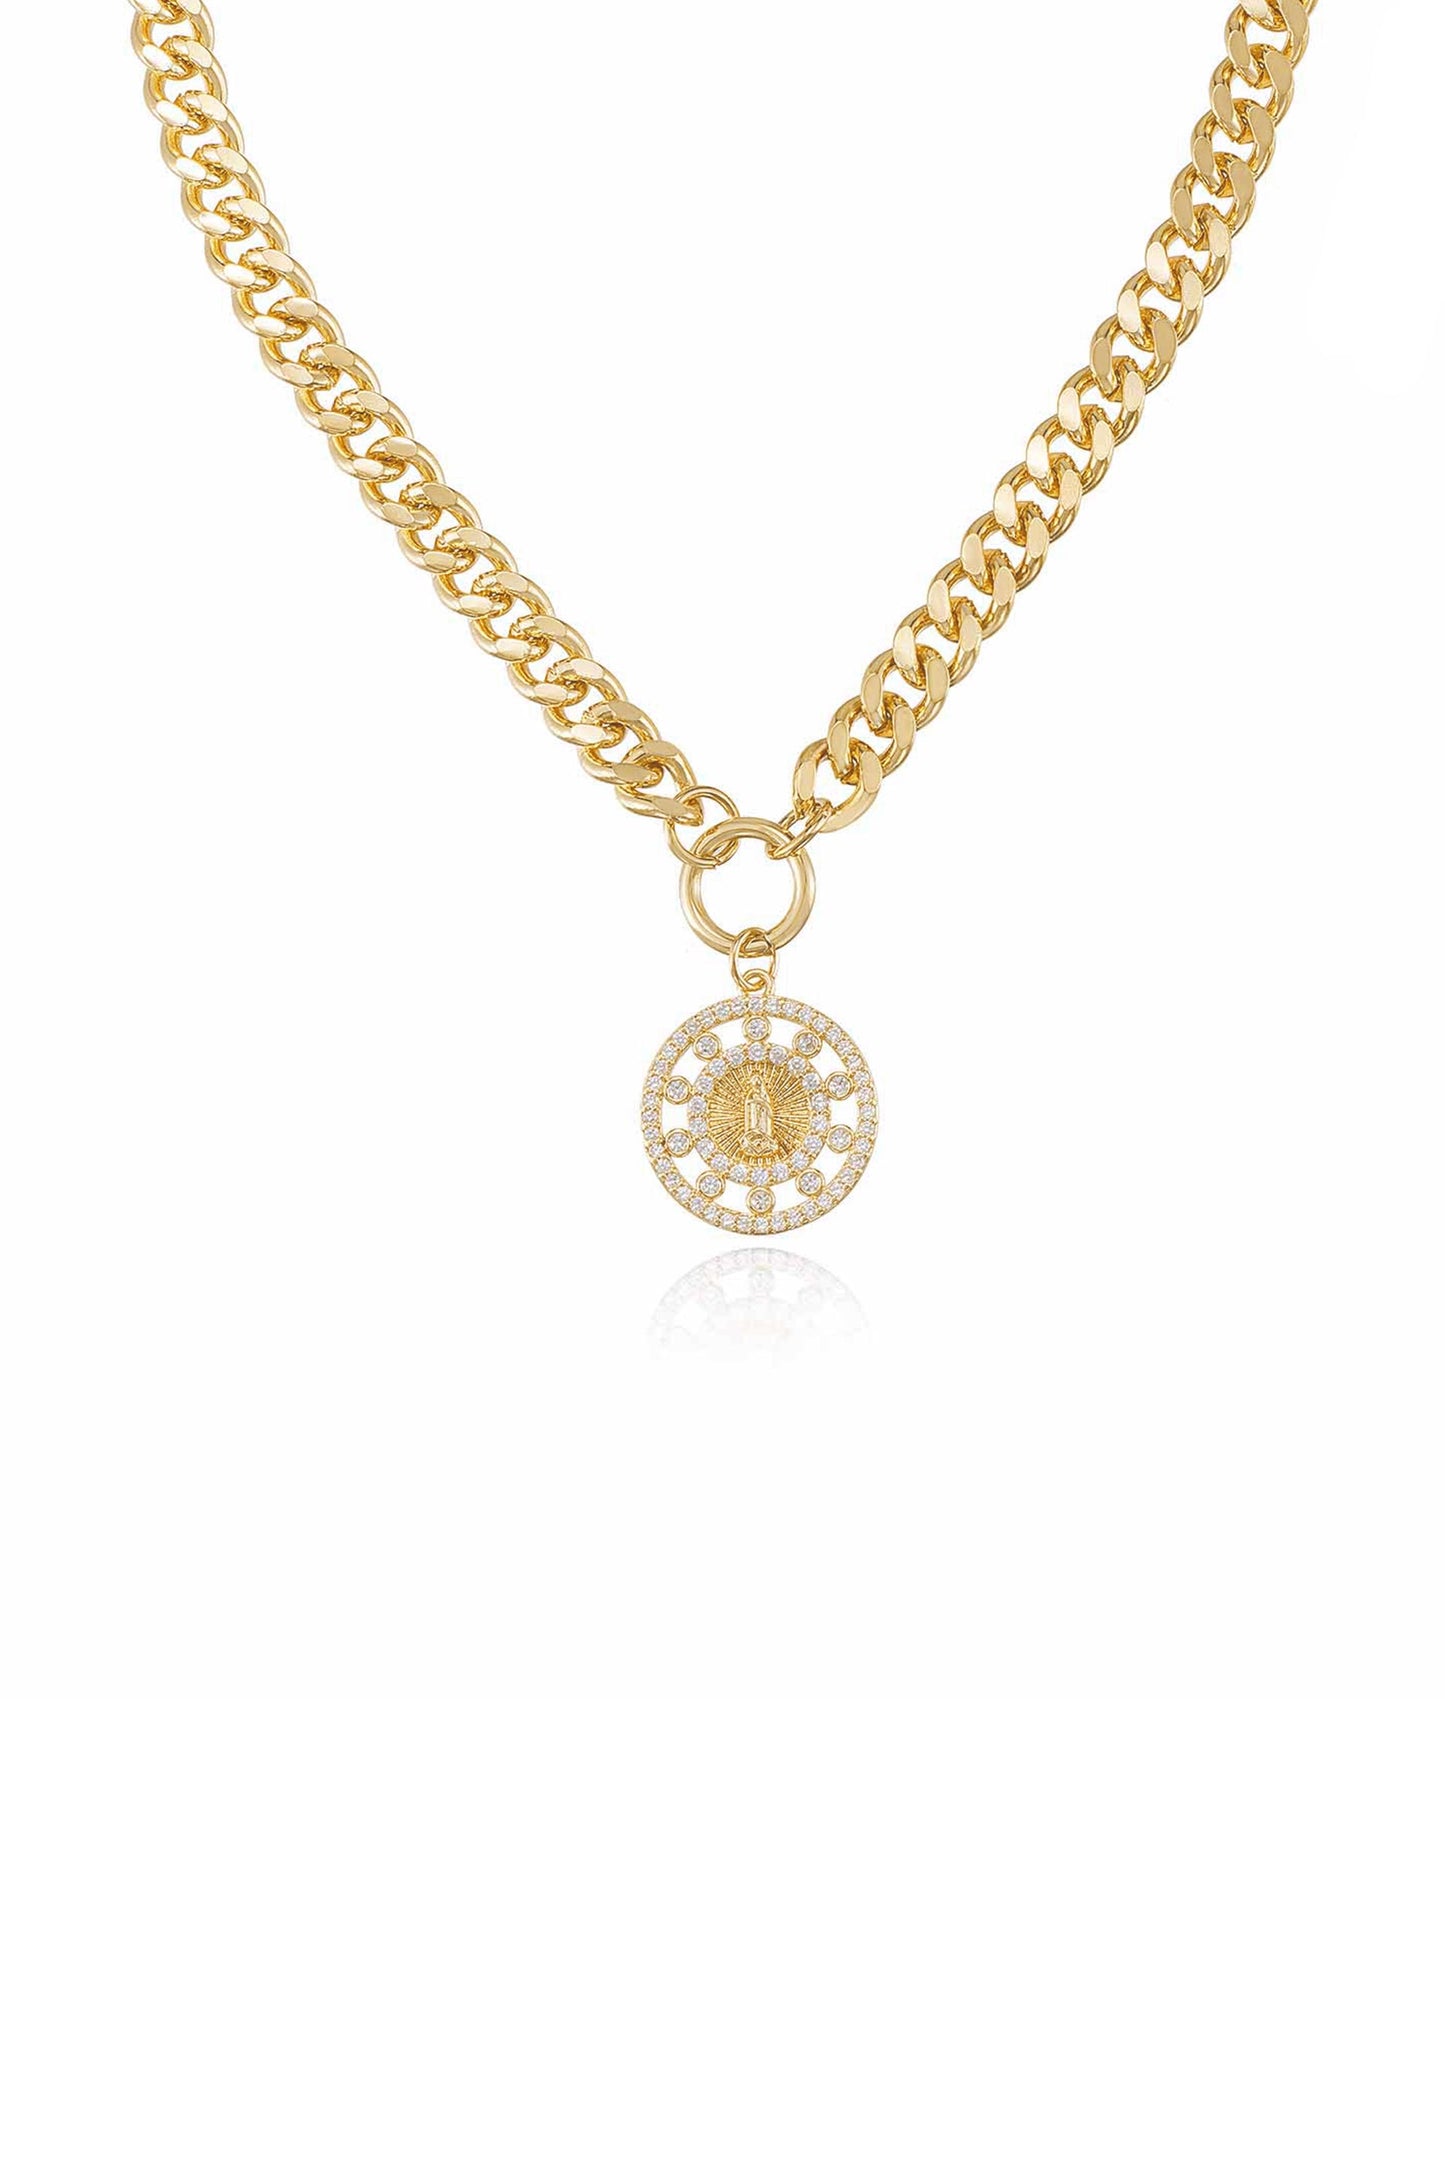 Crystal Pendant 18k Gold Plated Chain Link Necklace 